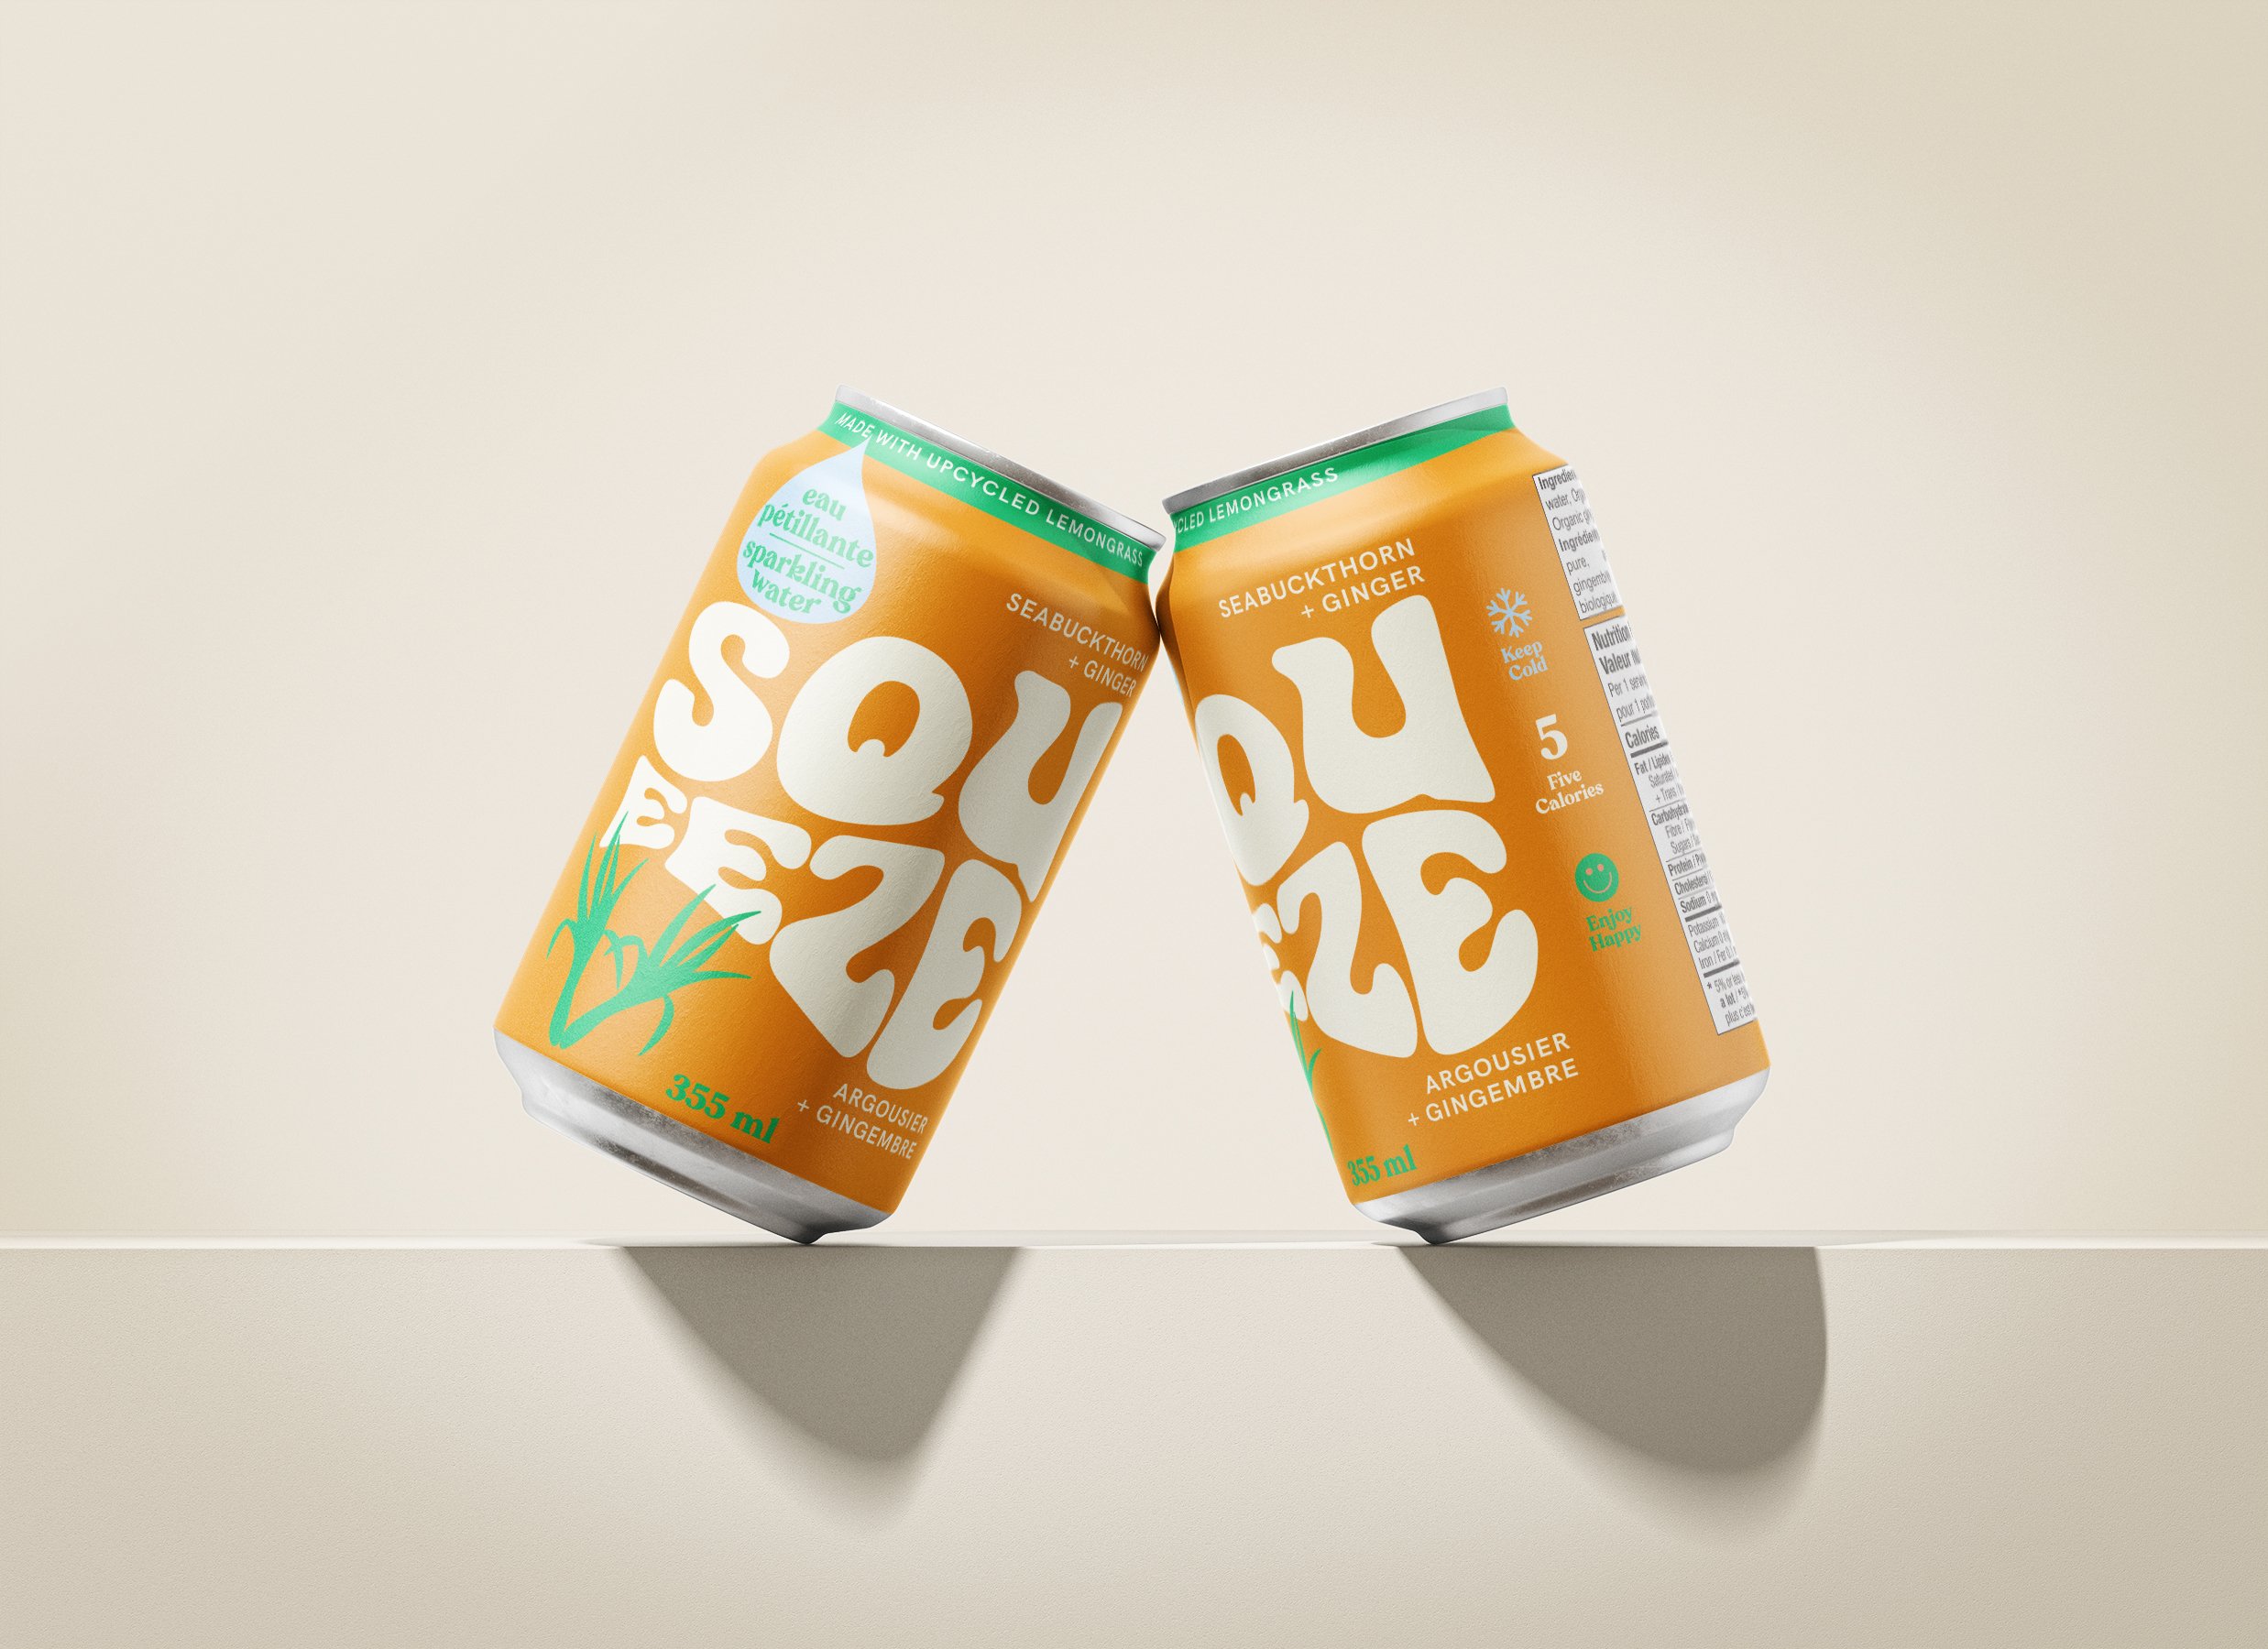 Eye Candy Design: Fresh, Iconic Design for Food & Beverage CPG